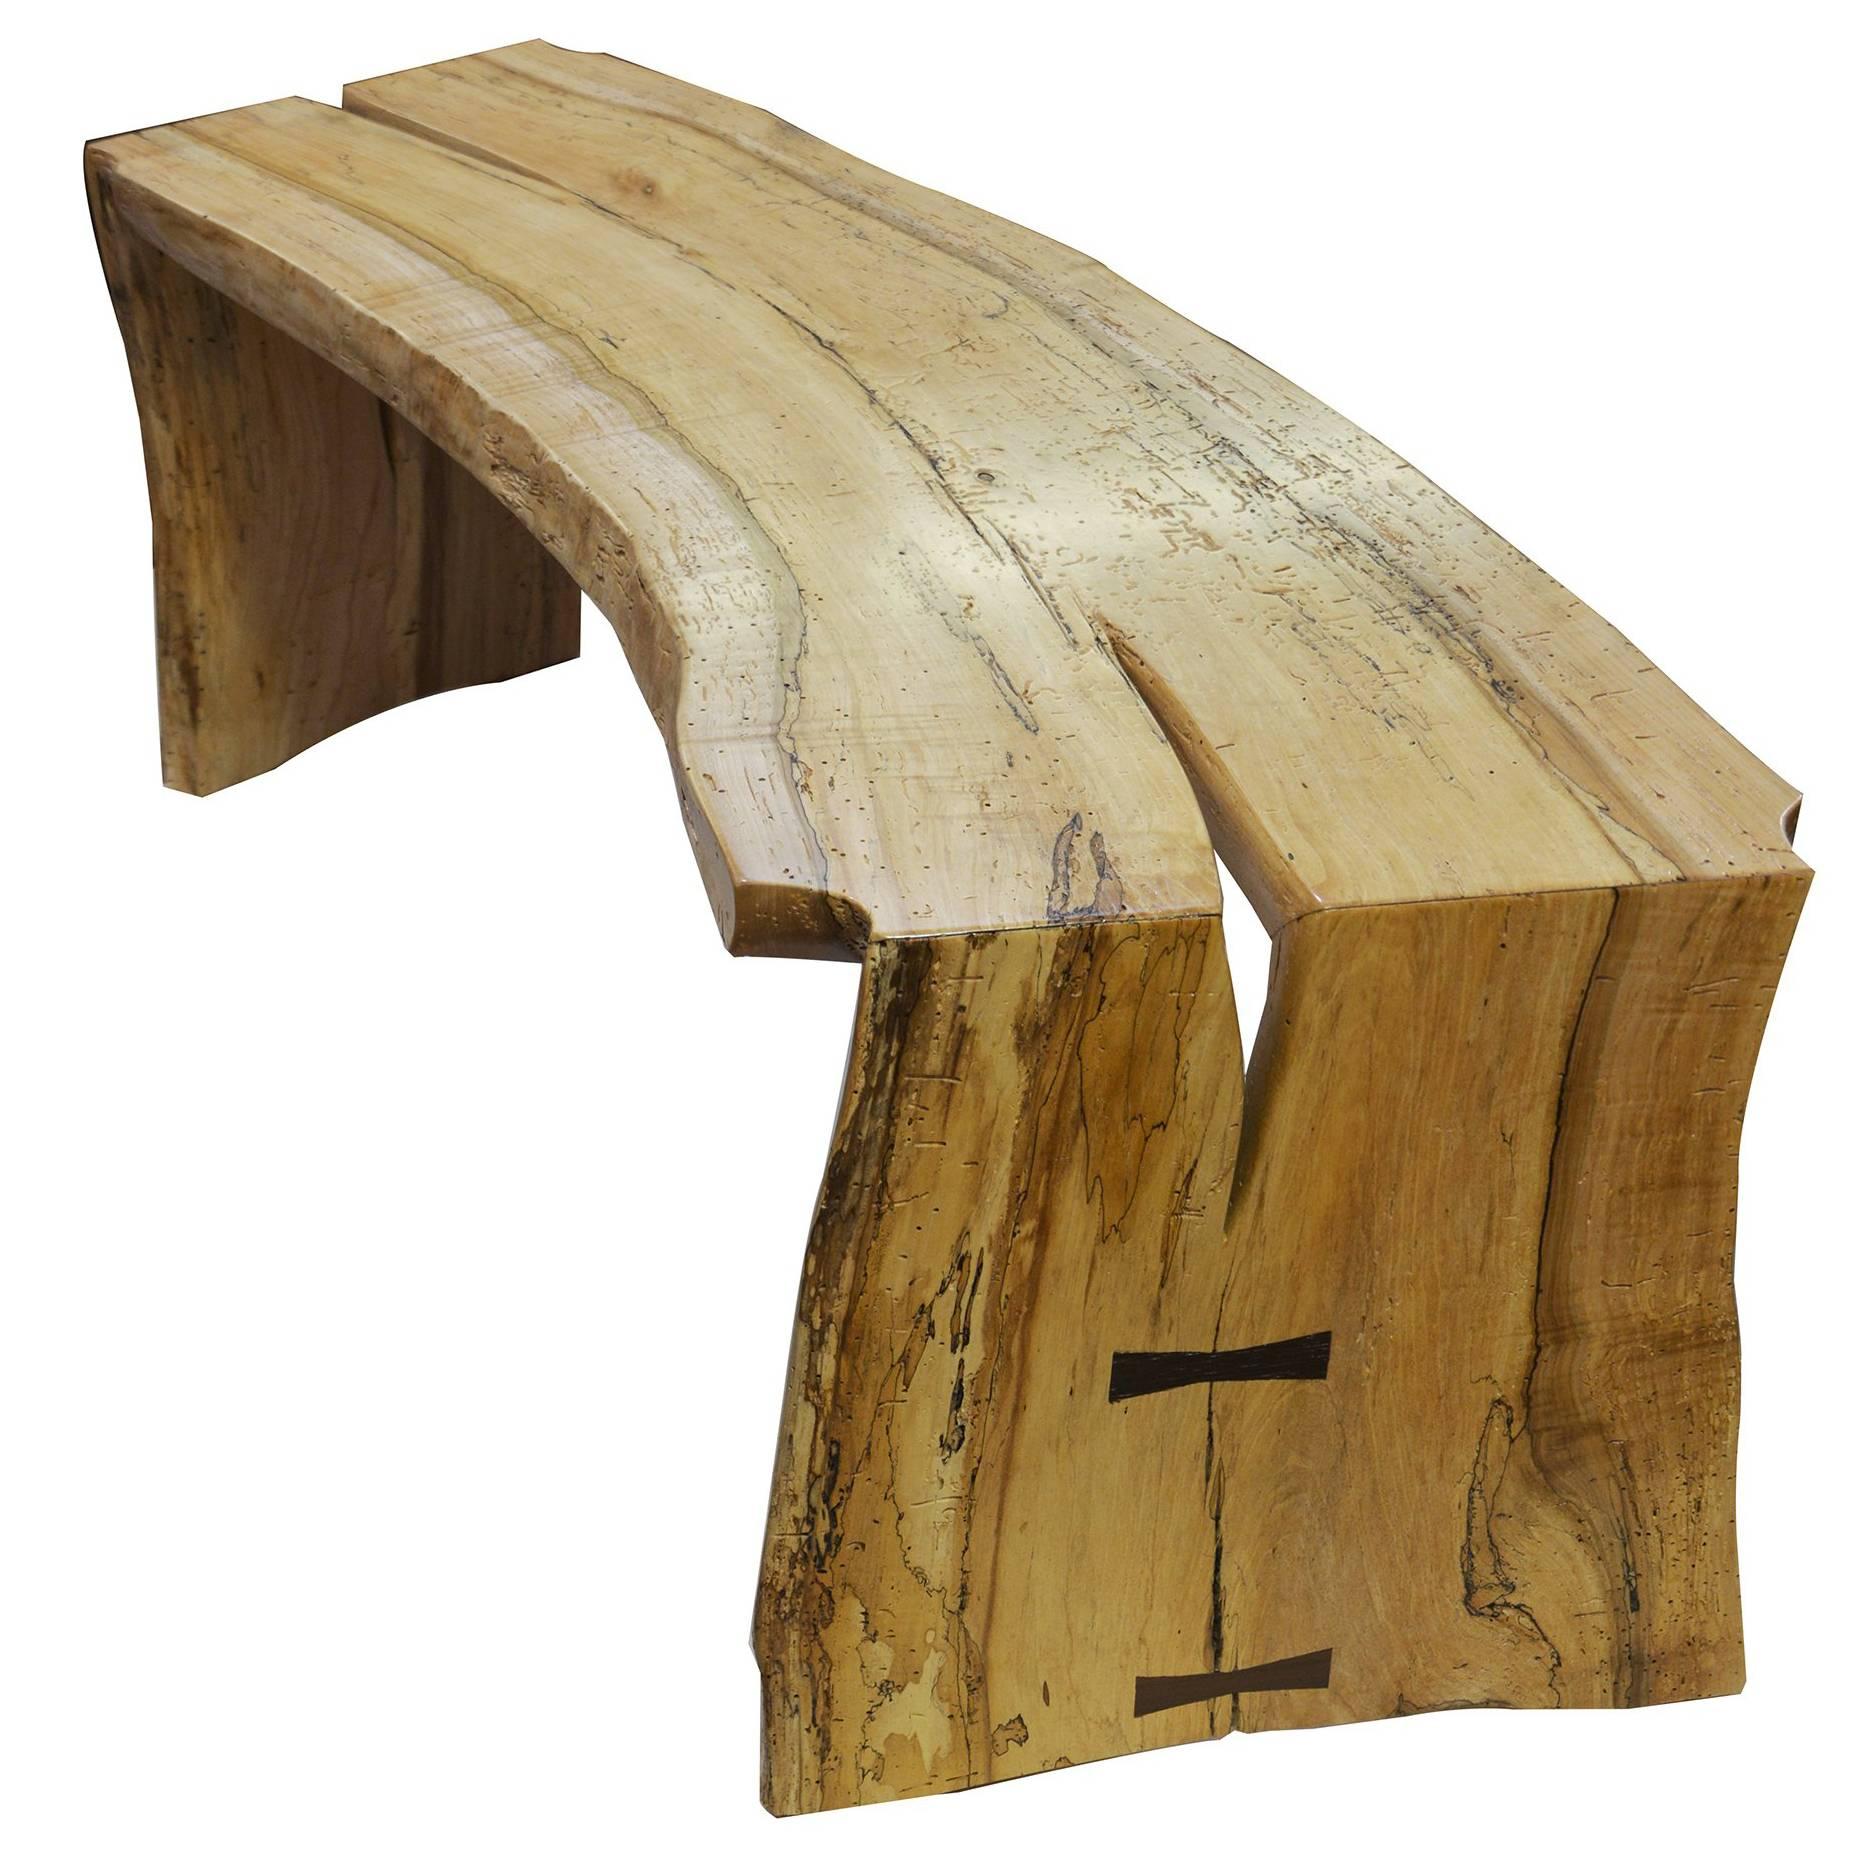 The David Ebner Free Edge Spalted Maple Bench